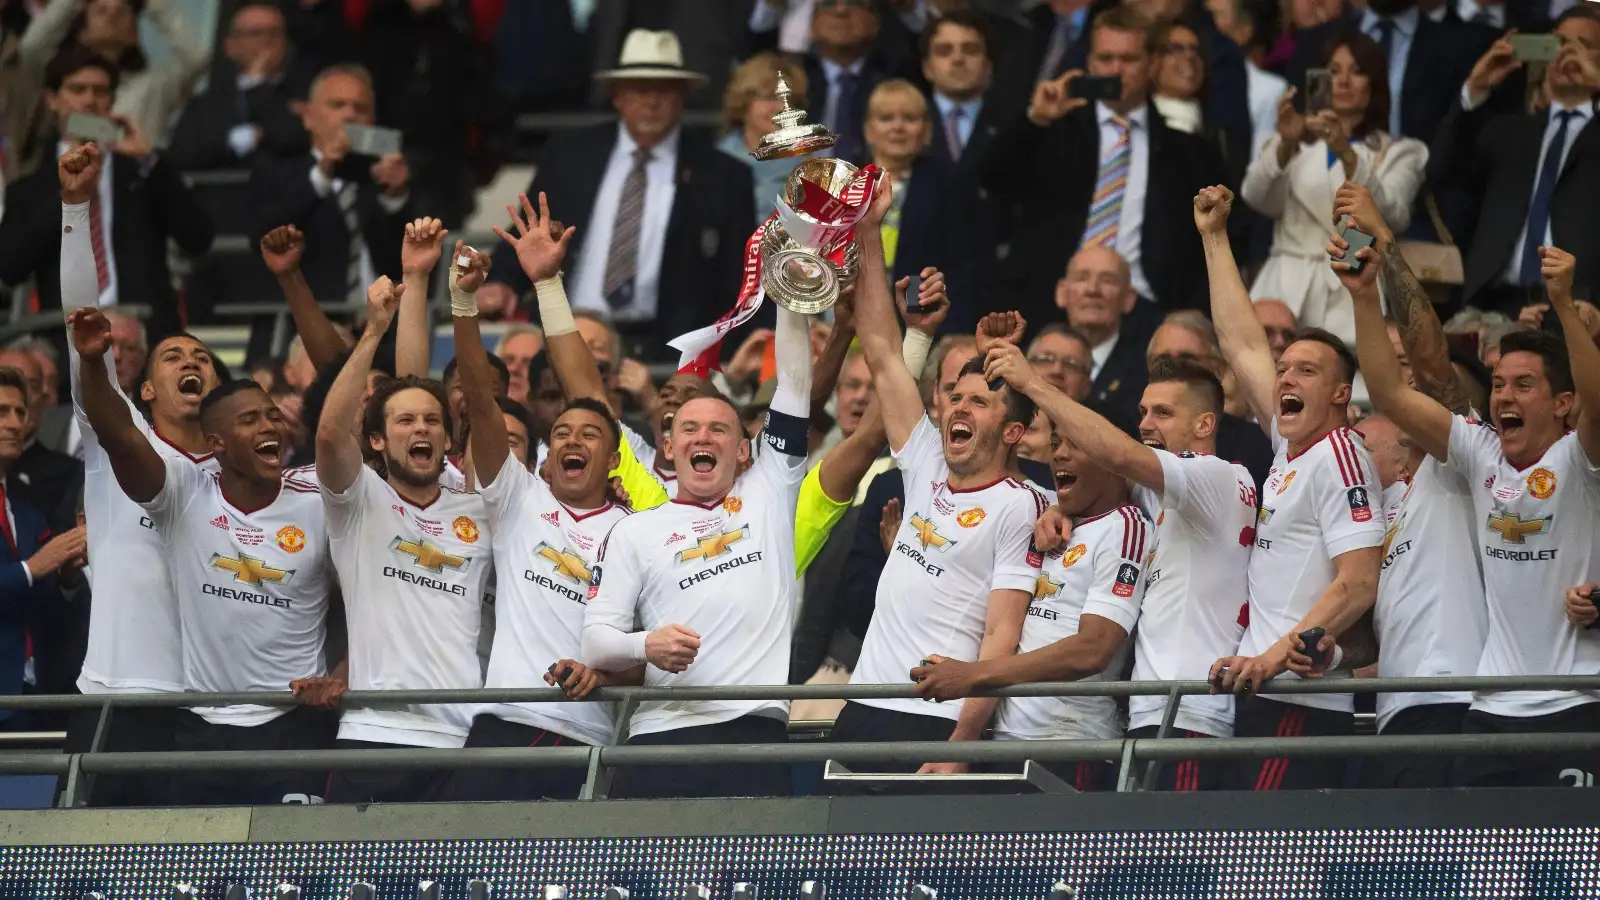 Can you name every year that Man Utd have won the FA Cup?